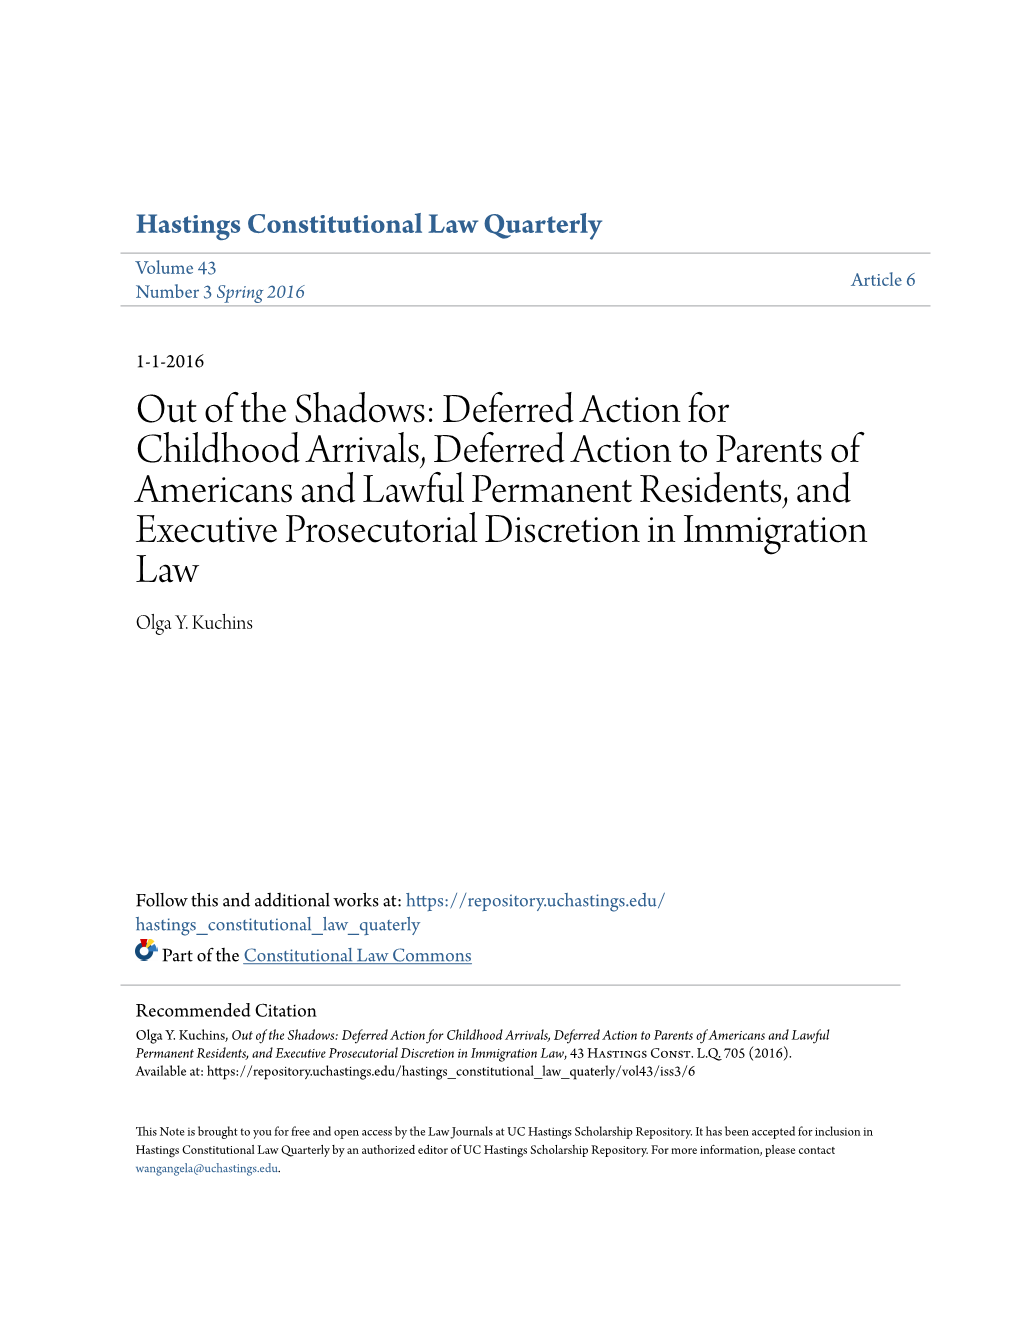 Out of the Shadows: Deferred Action for Childhood Arrivals, Deferred